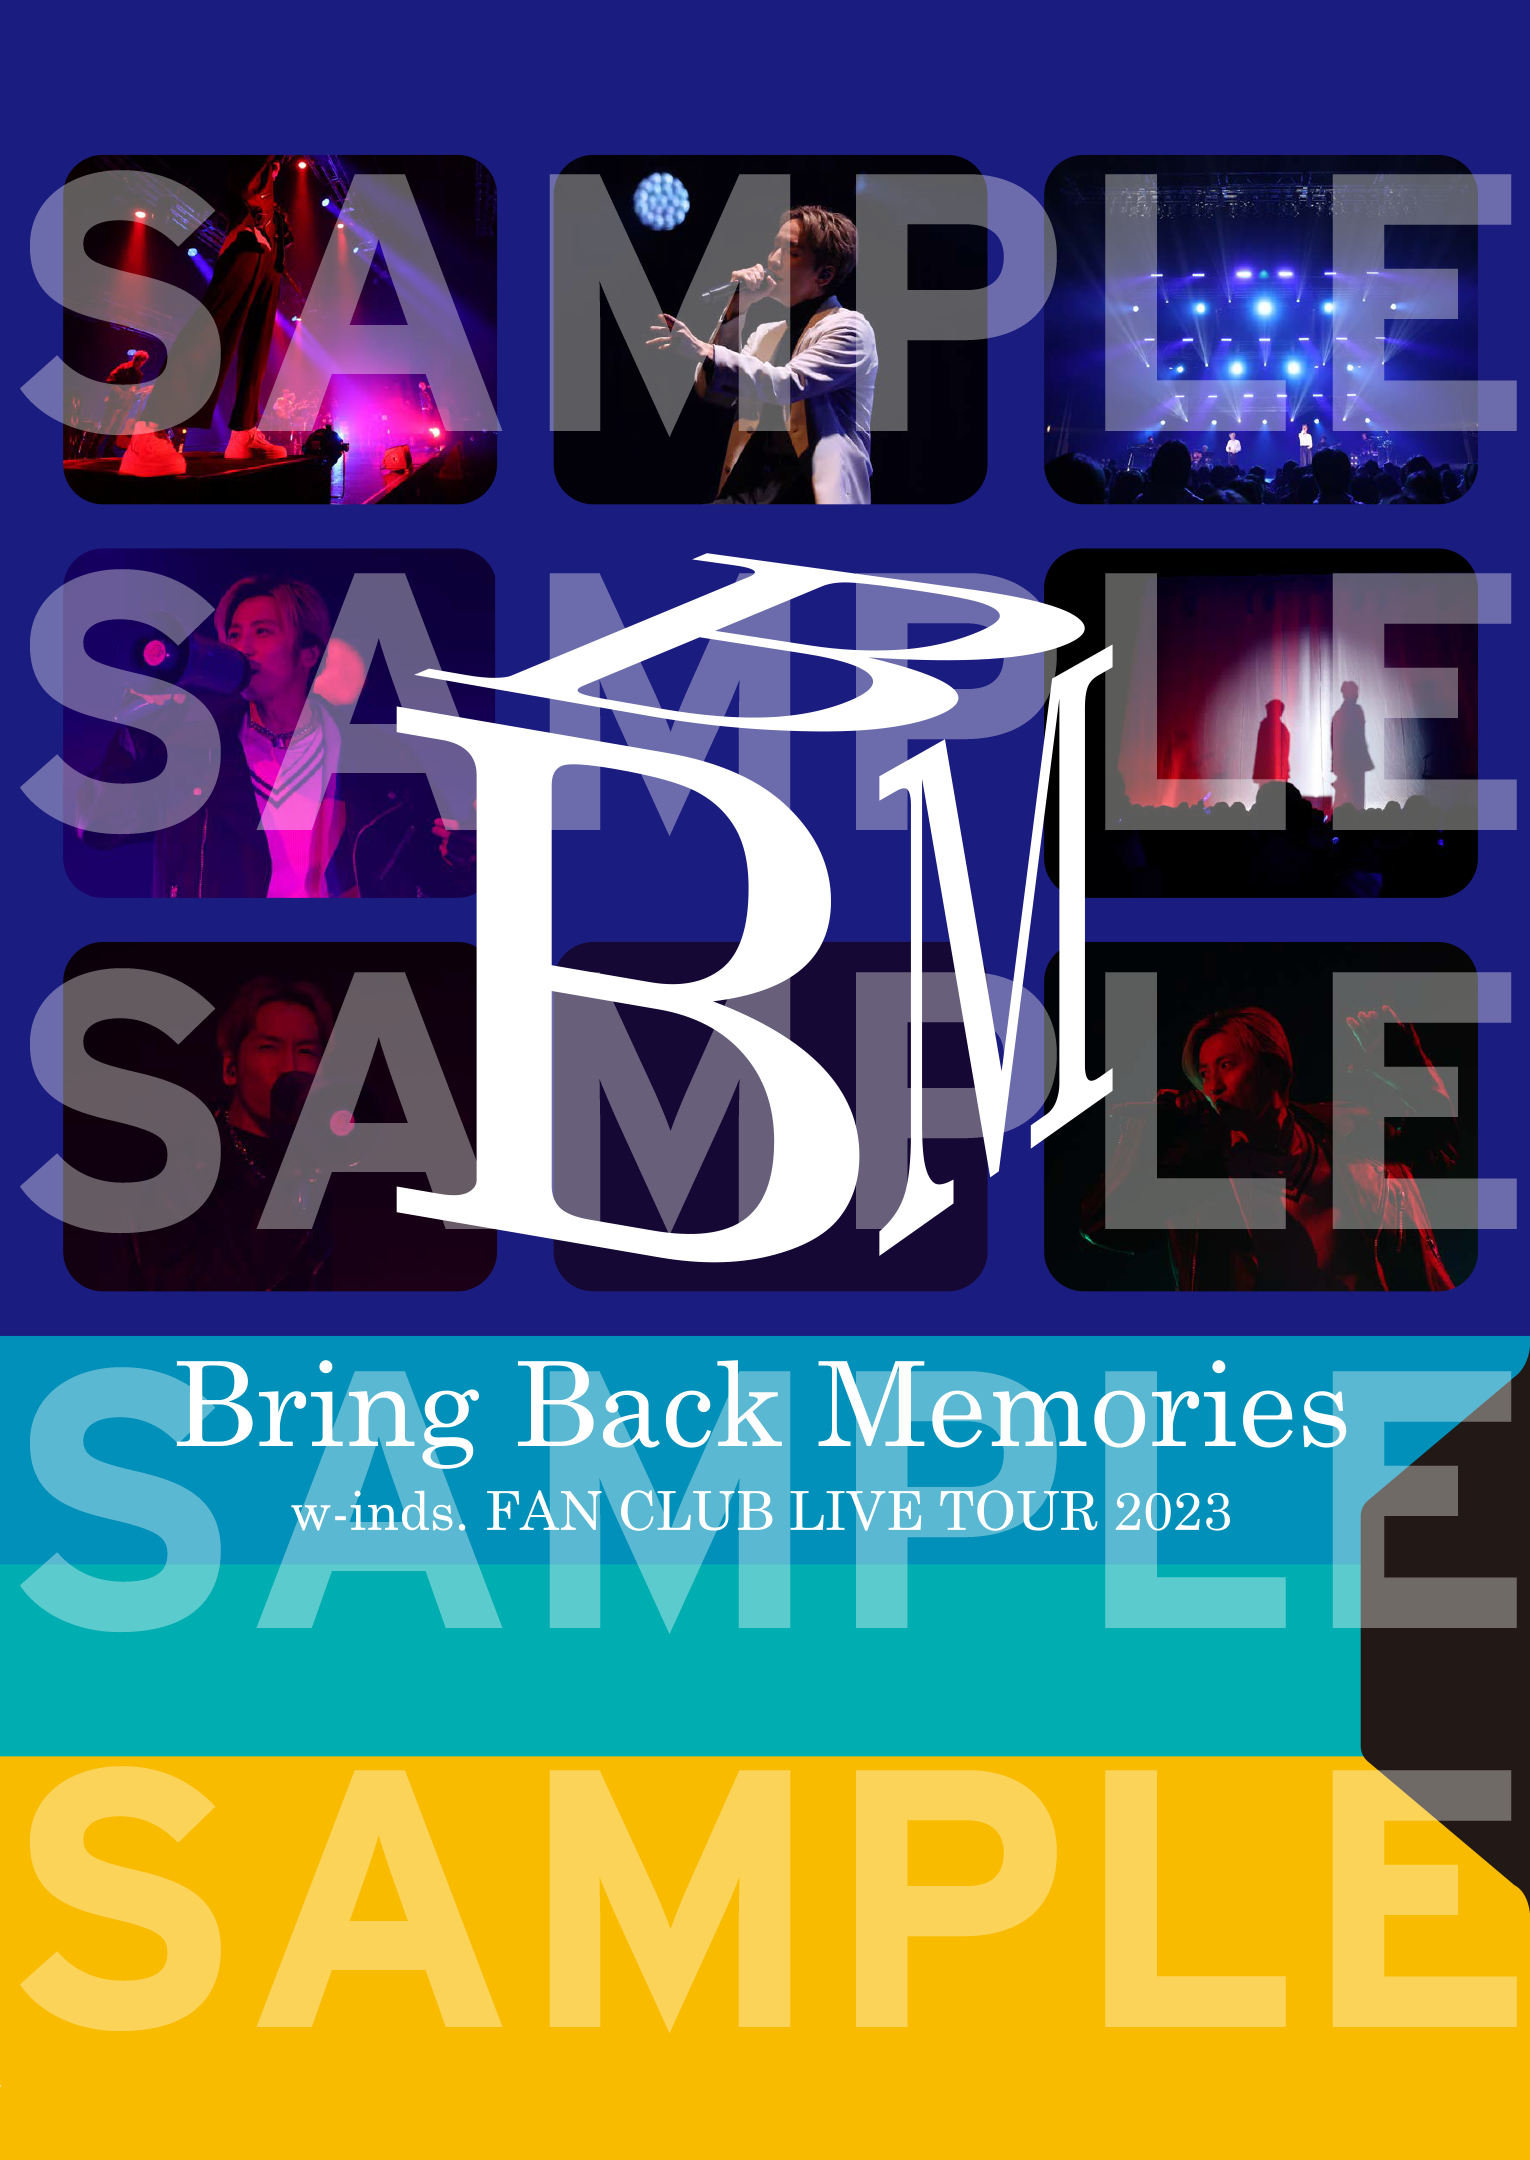 w-inds. FAN CLUB LIVE TOUR 2023 ~Bring back memories~」DVD/Blu-ray 